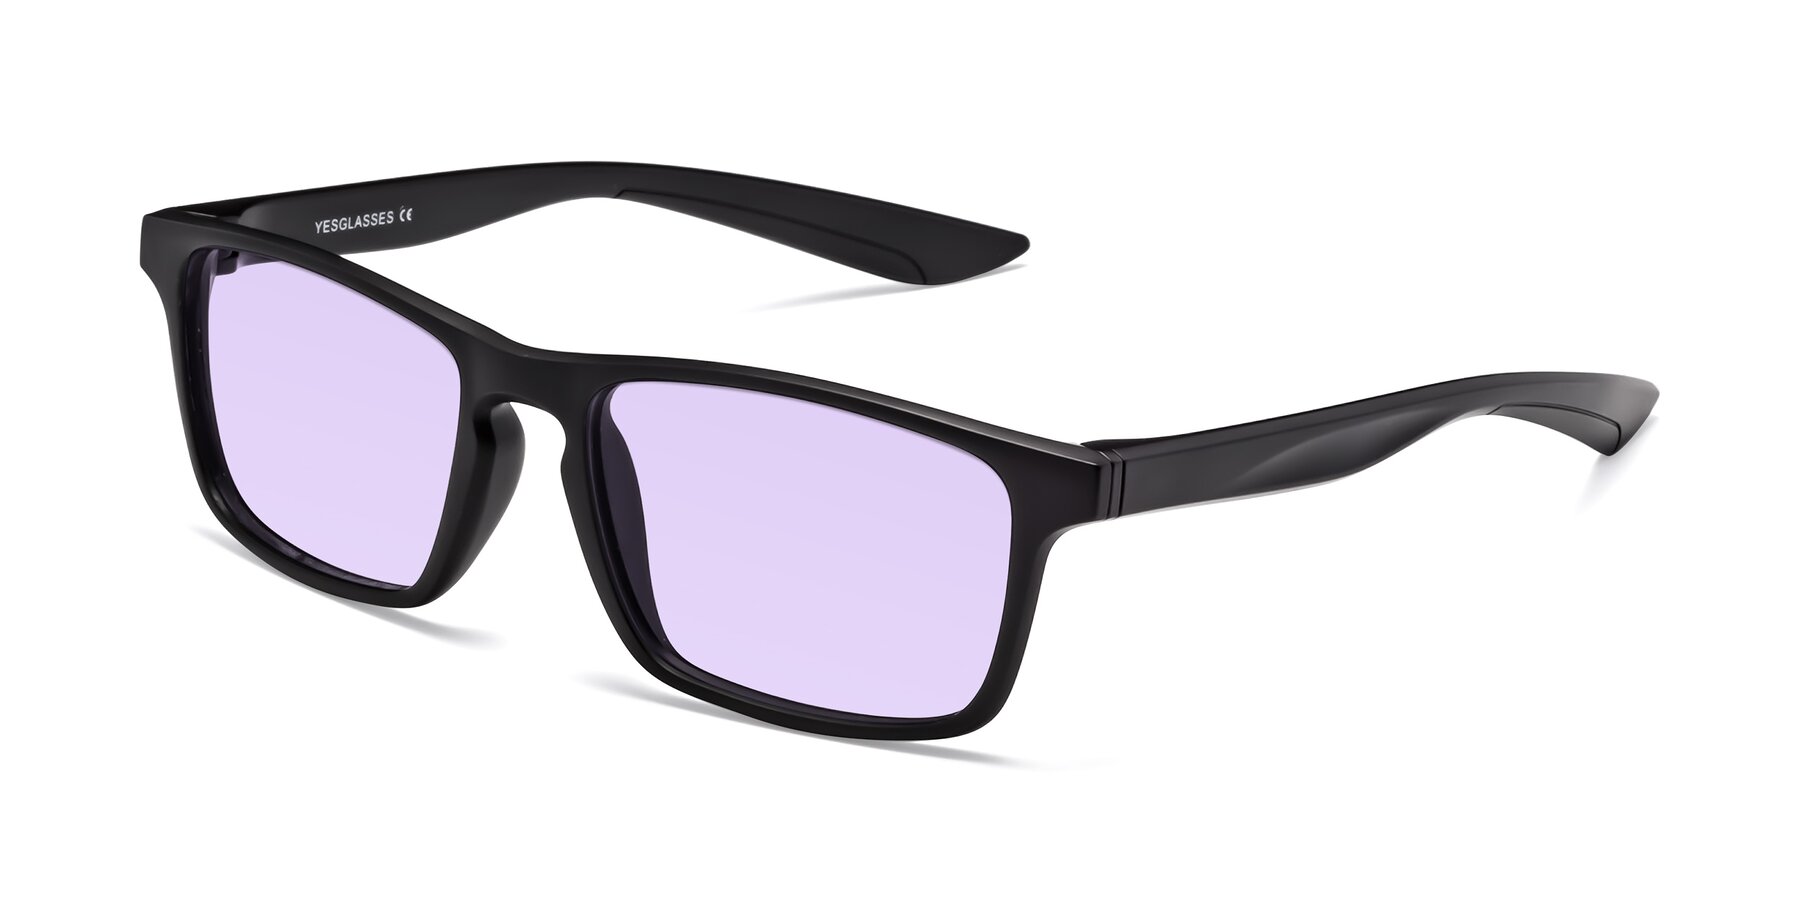 Angle of Passion in Matte Black with Light Purple Tinted Lenses